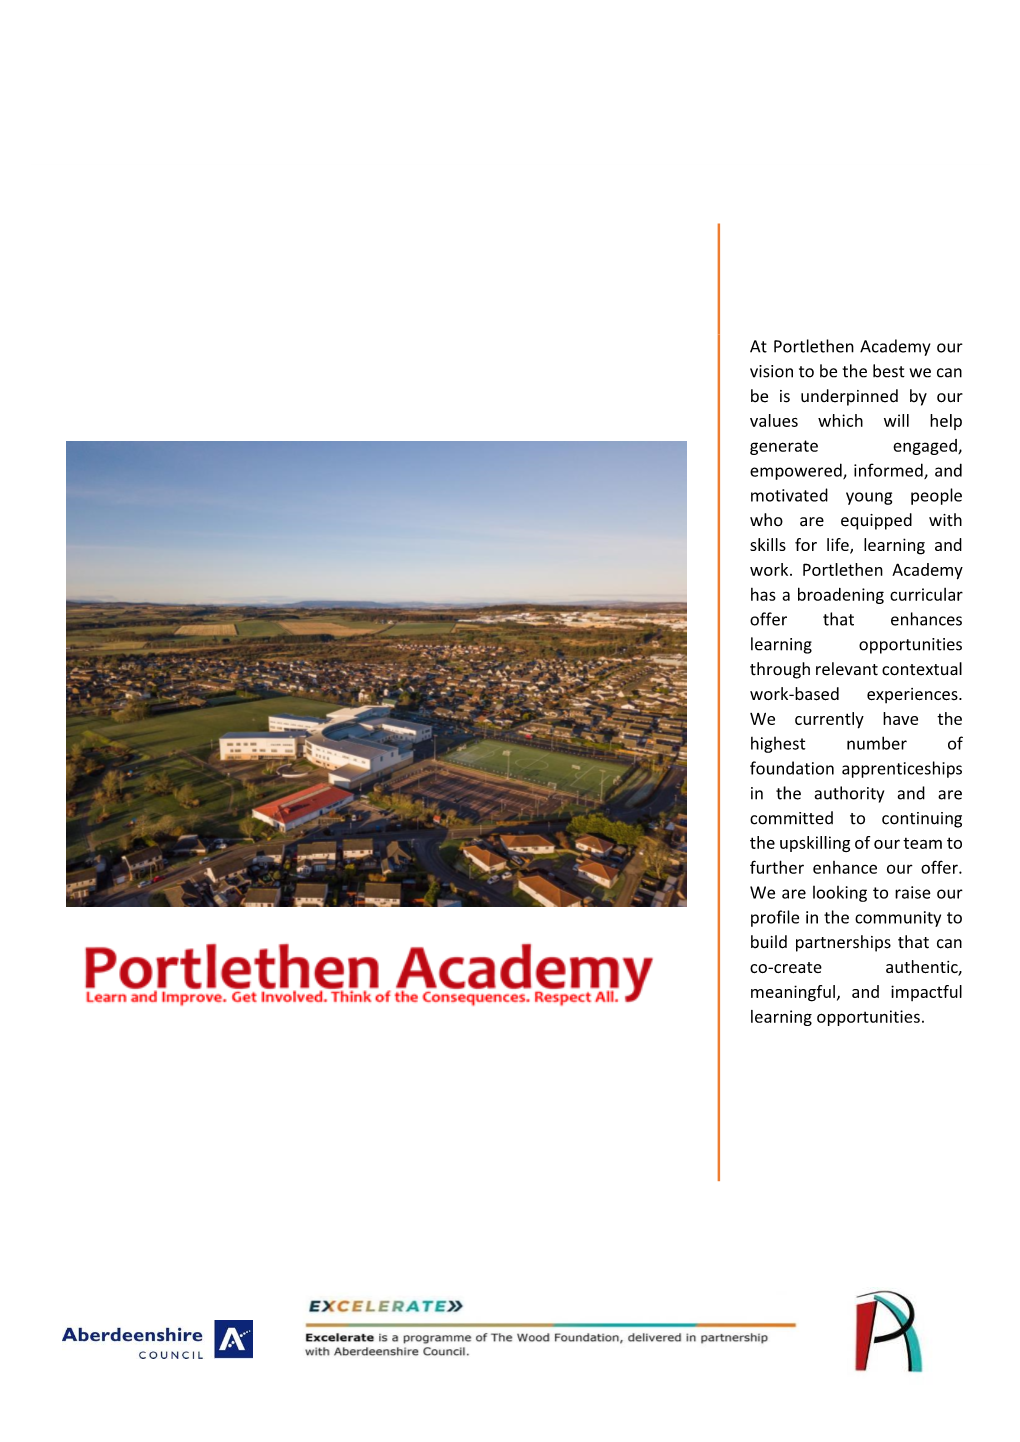 Portlethen Academy Overview